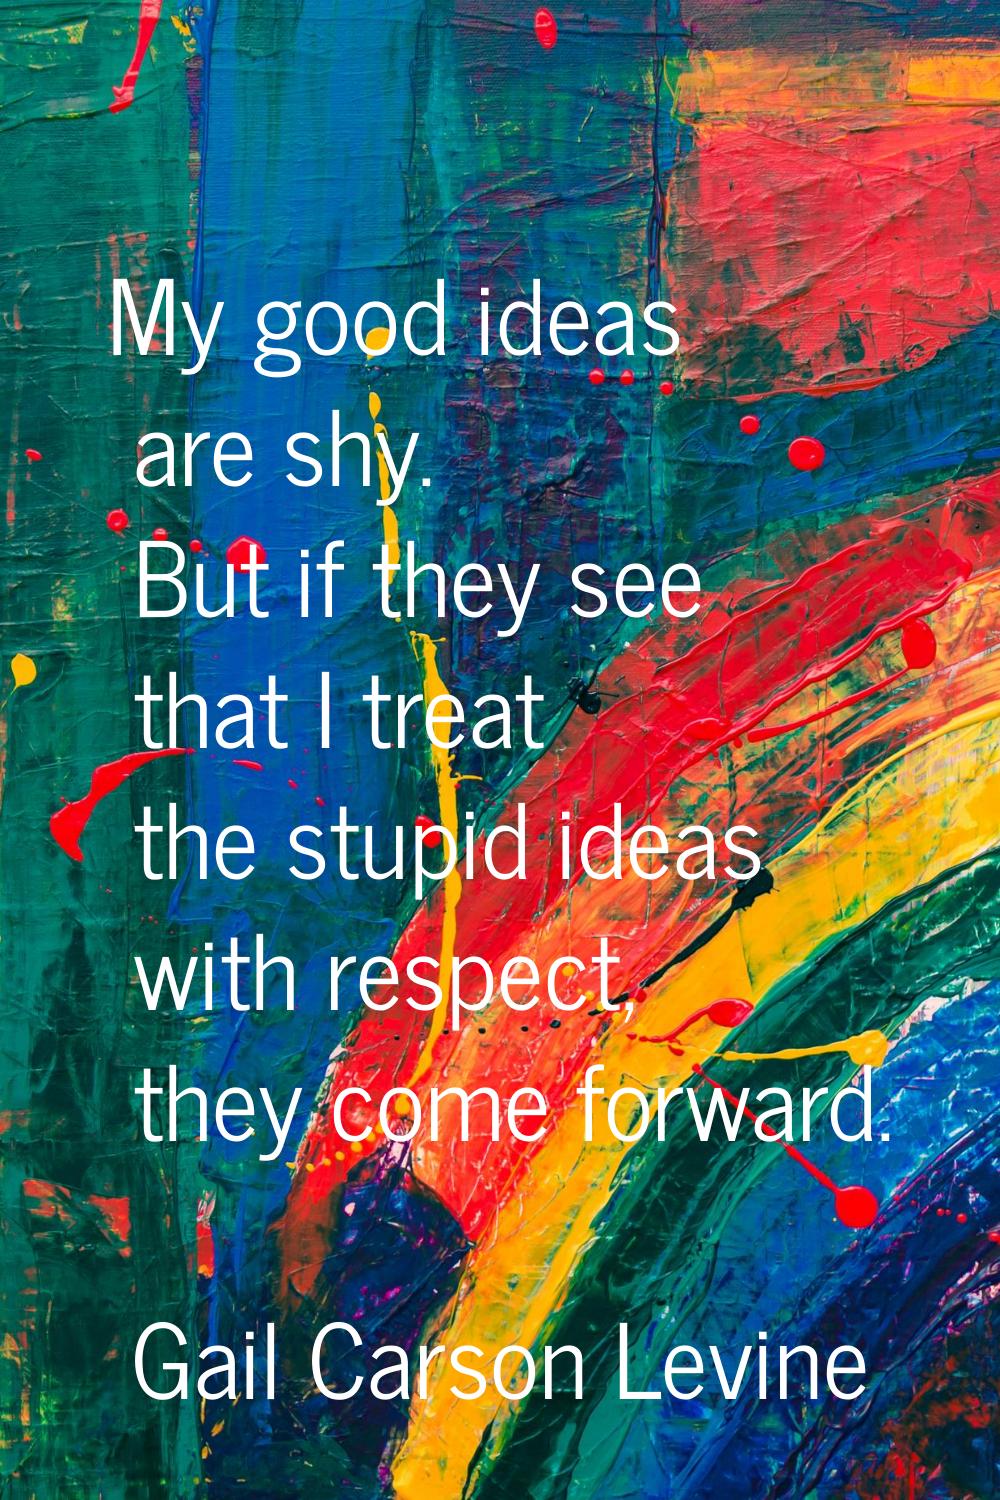 My good ideas are shy. But if they see that I treat the stupid ideas with respect, they come forwar